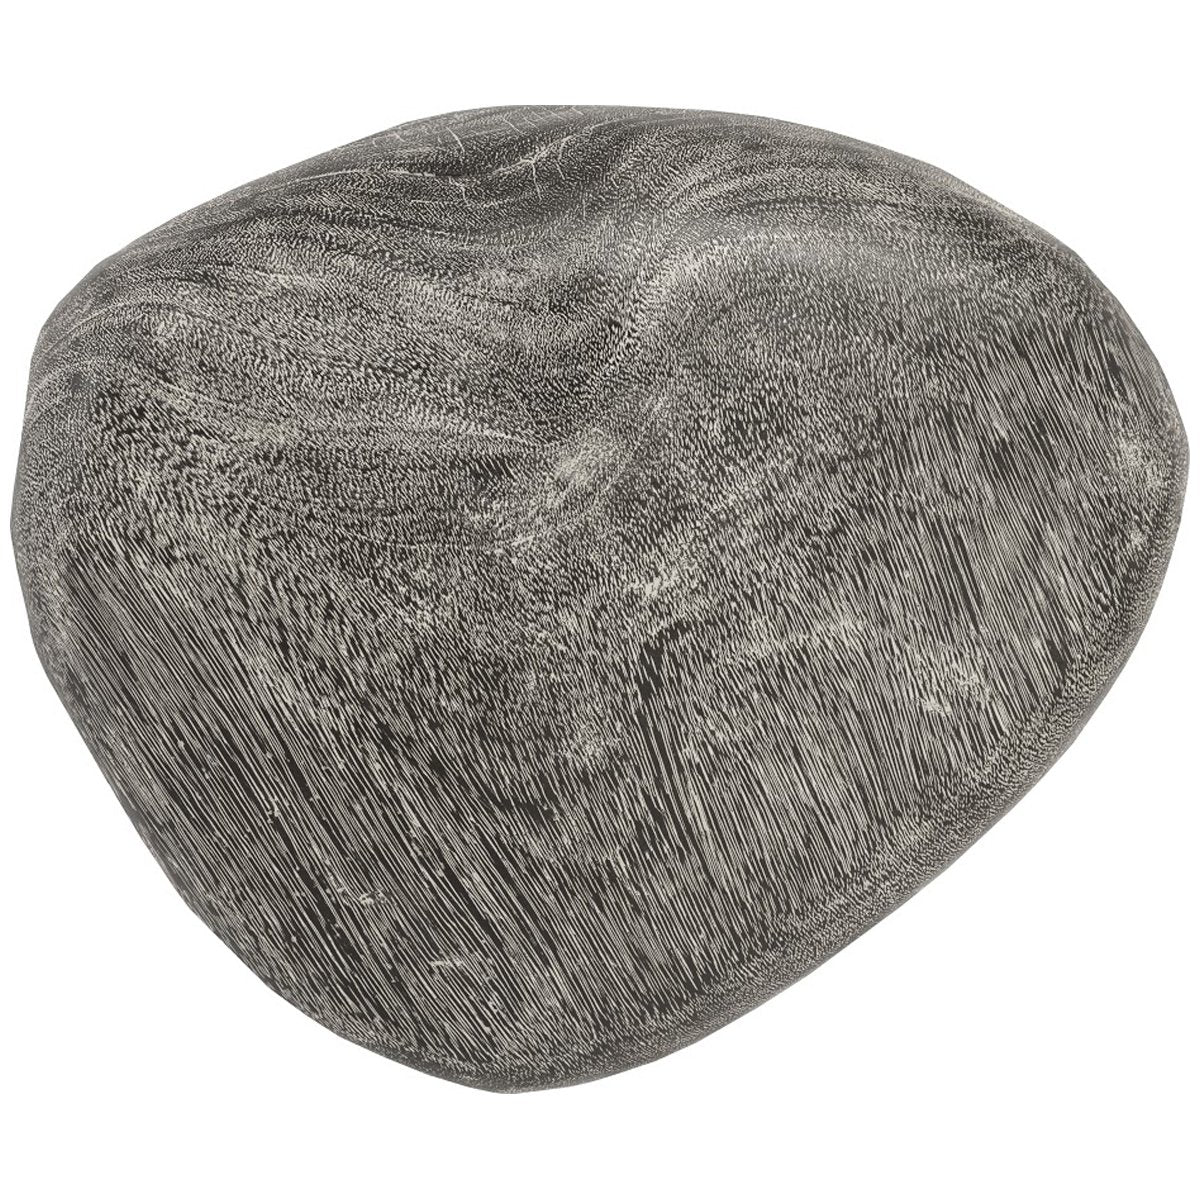 Phillips Collection River Stone Wood Wall Tile, Extra Large